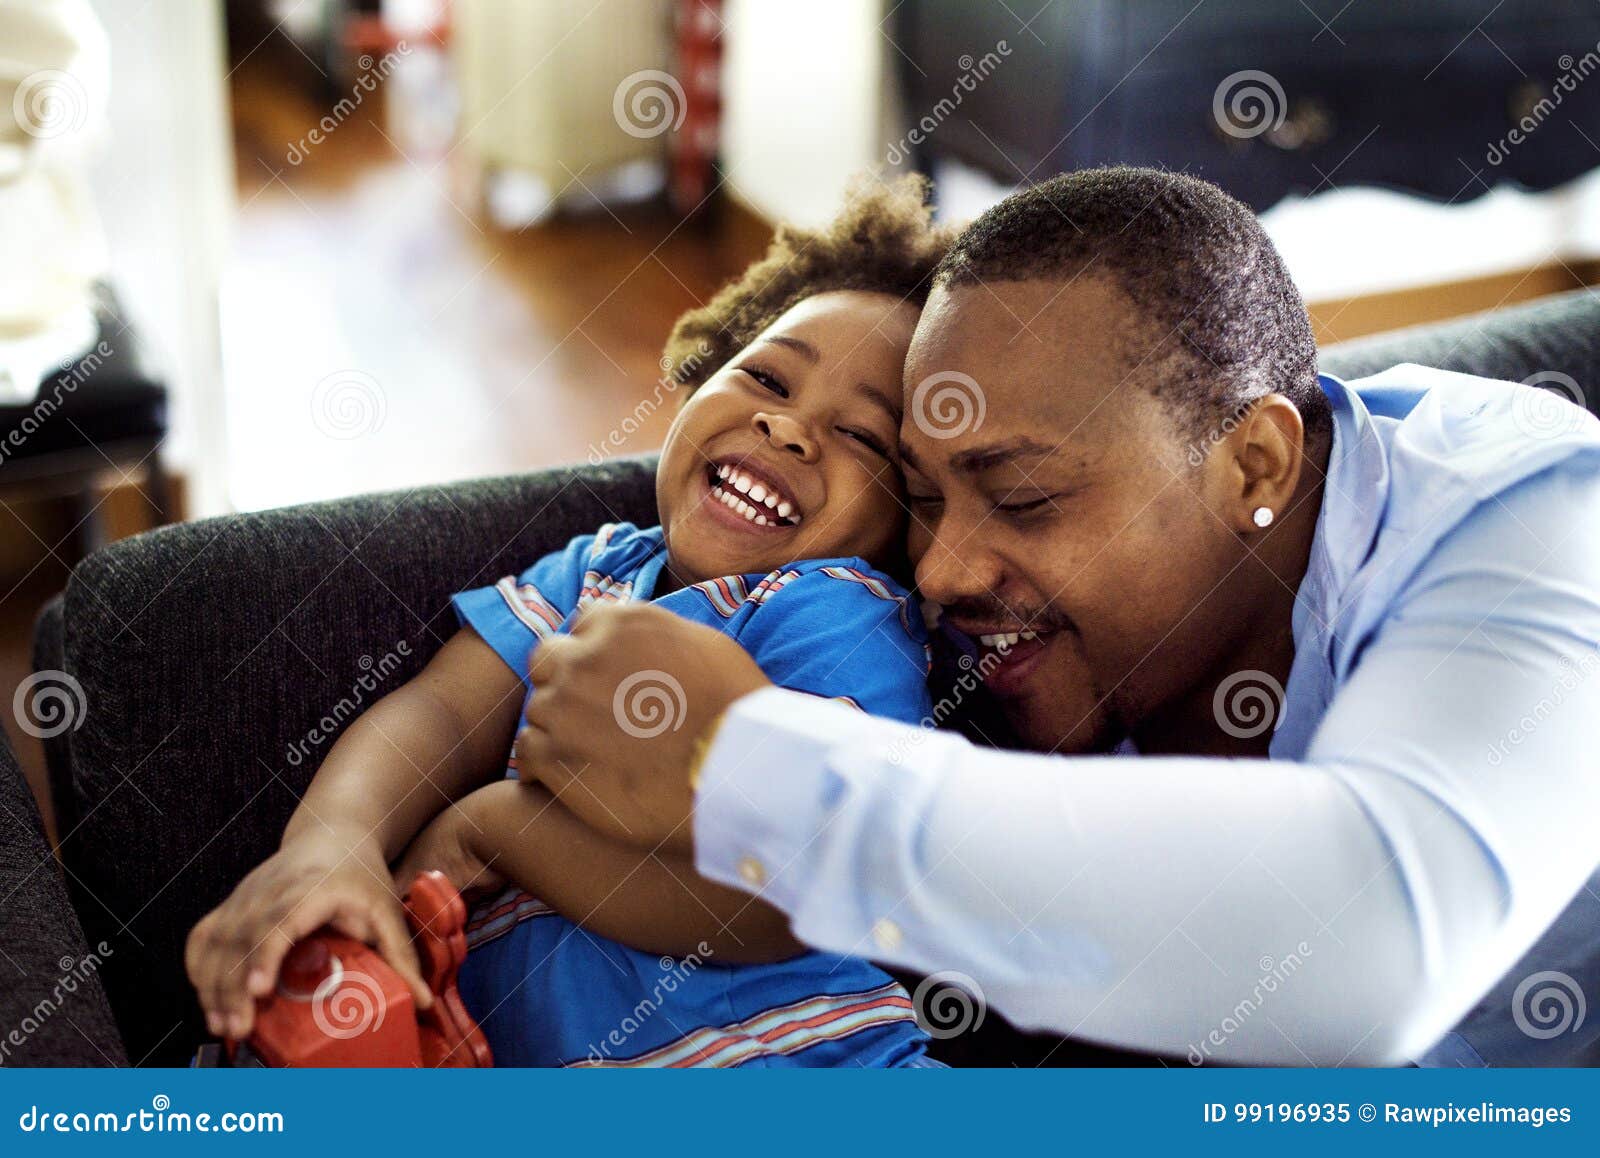 black father enjoy precious time with his child together happiness